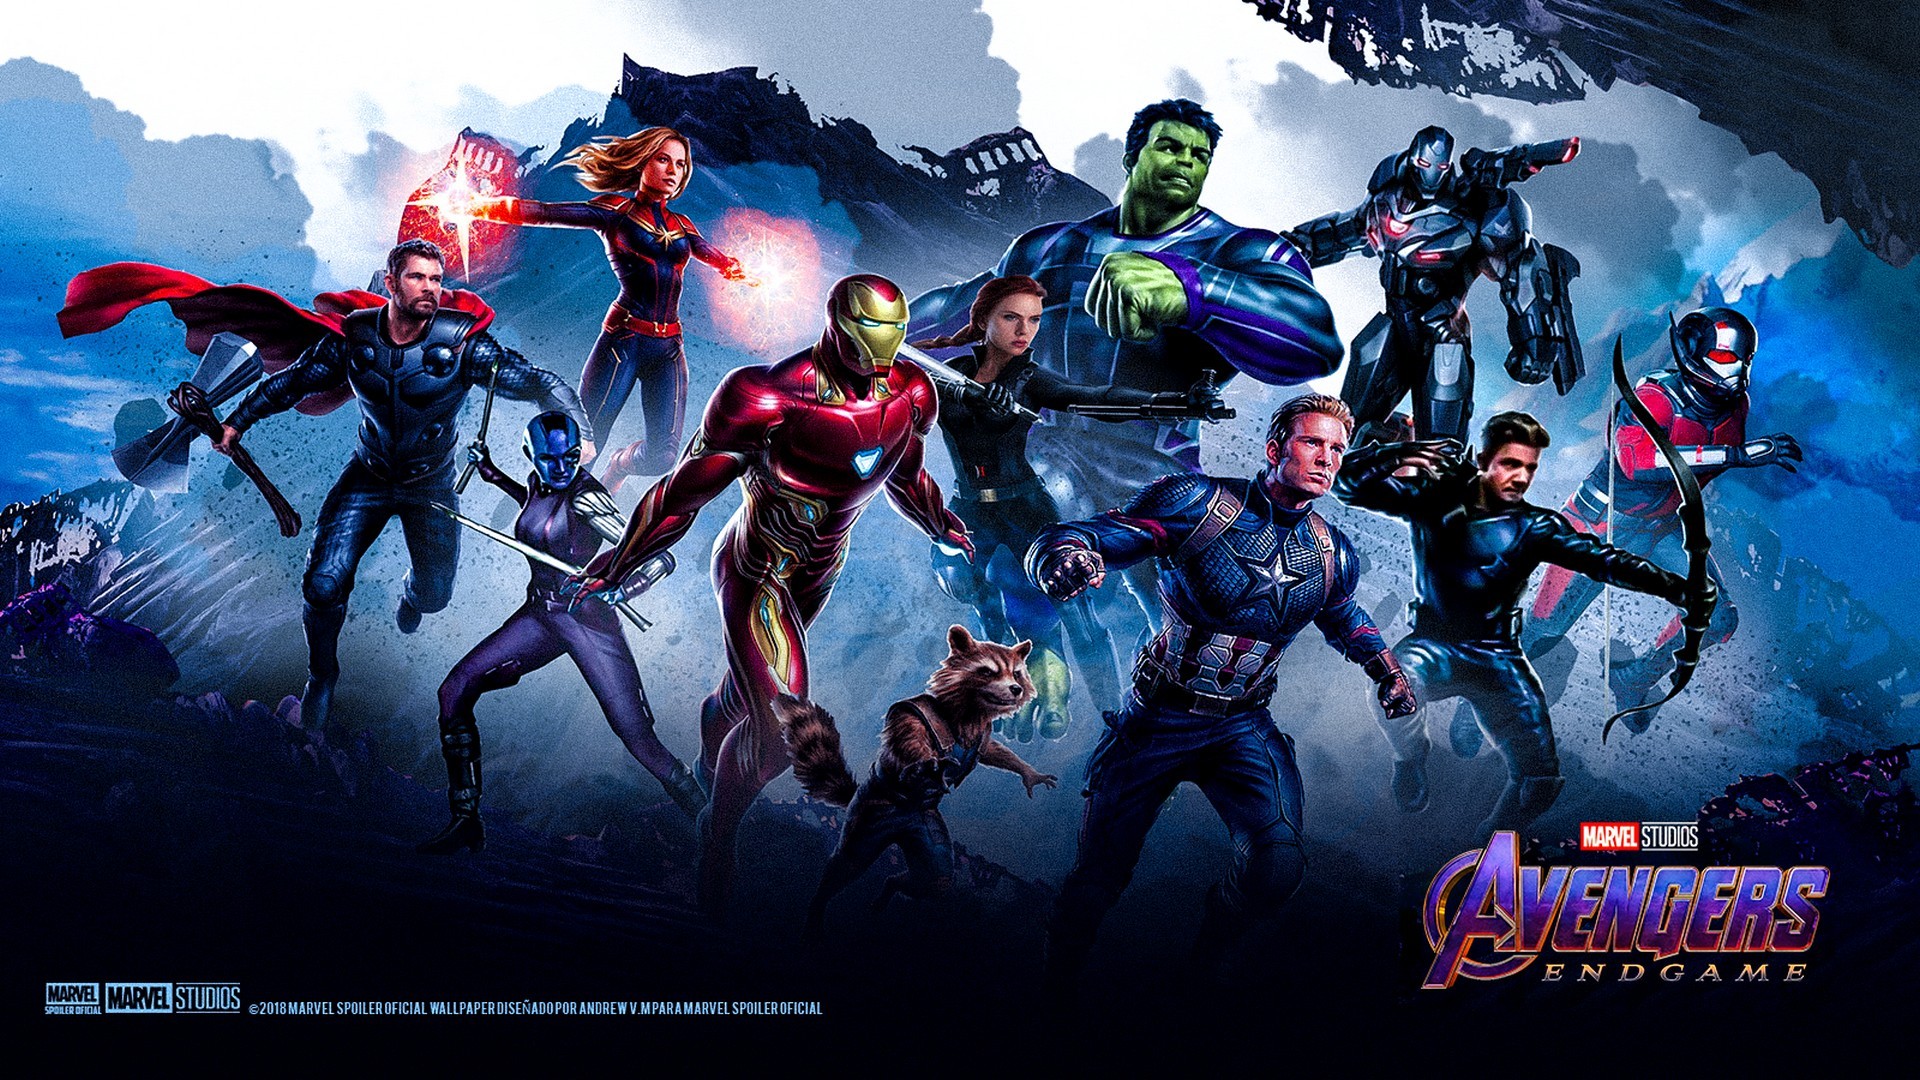 Avengers Endgame 2019 Wallpaper HD with high-resolution 1920x1080 pixel. You can use this poster wallpaper for your Desktop Computers, Mac Screensavers, Windows Backgrounds, iPhone Wallpapers, Tablet or Android Lock screen and another Mobile device